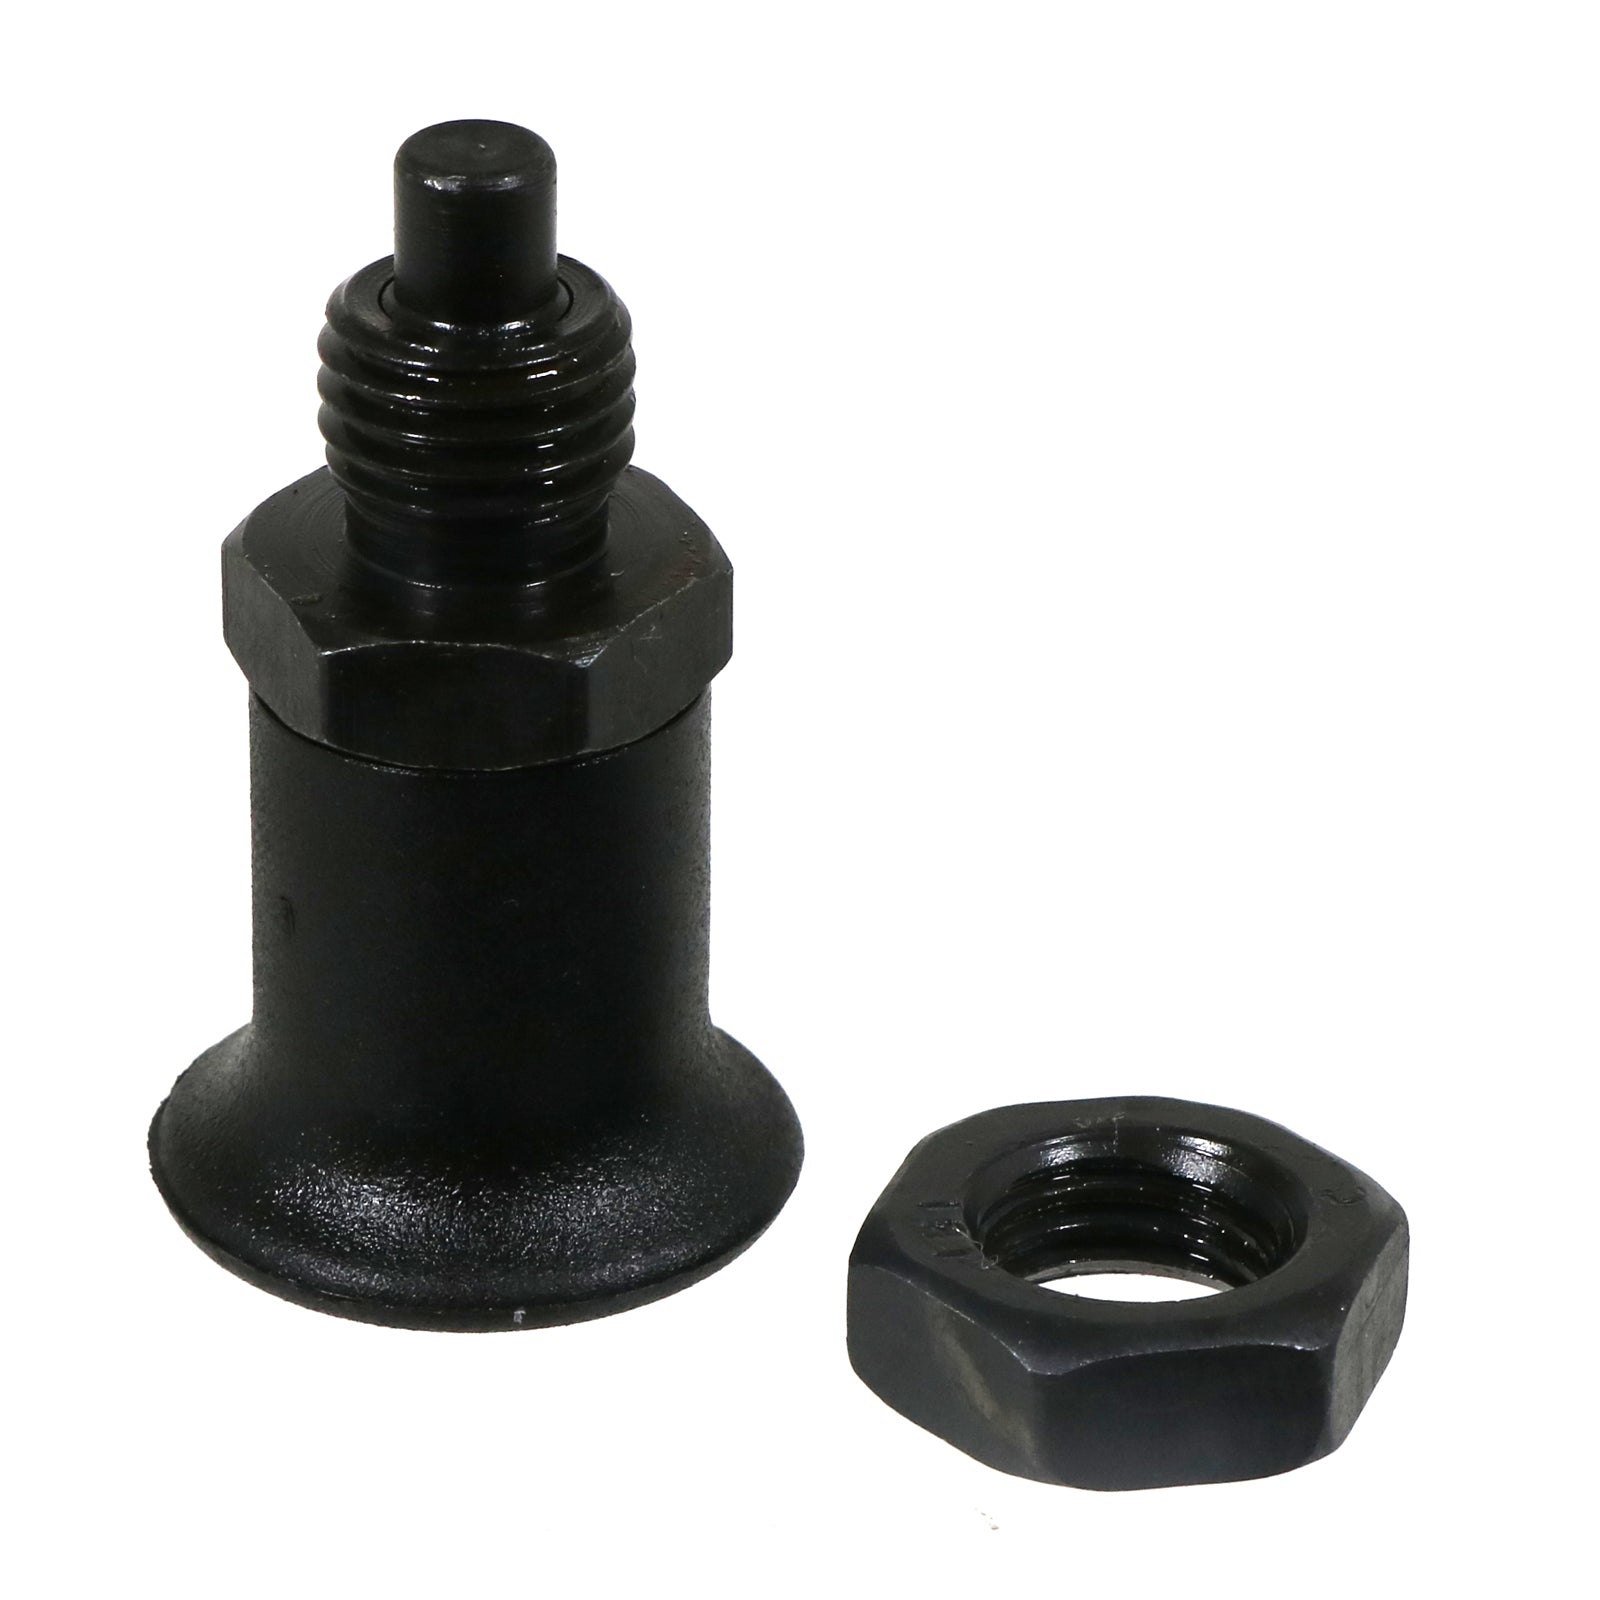 M12 Index Plunger Spring Loaded Retractable Locking Pin Blackened Steel